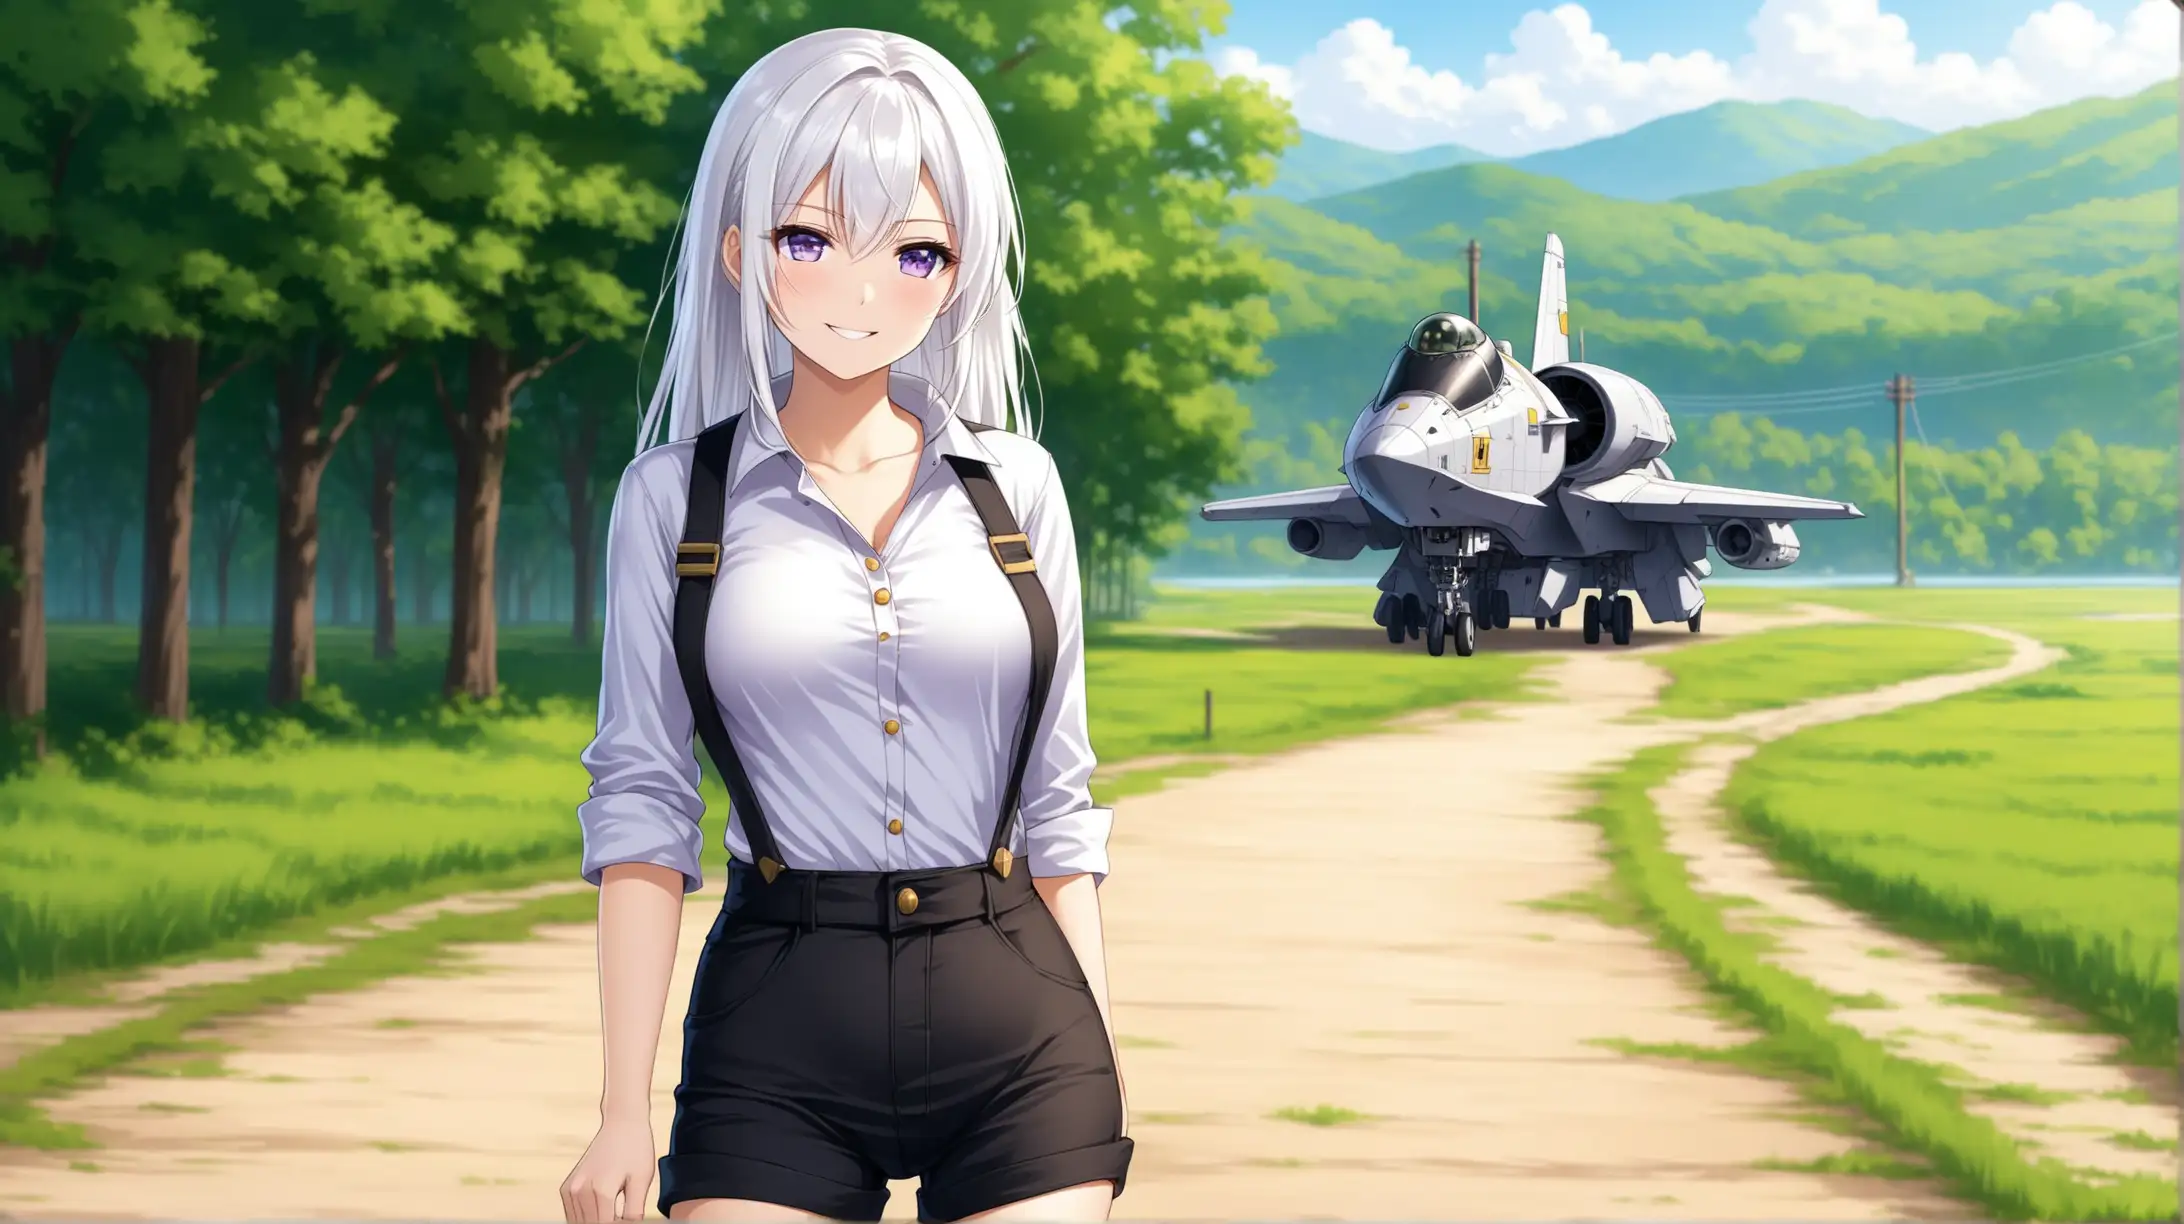 Casual Pose of Enterprise from Azur Lane in FalloutInspired Outfit Outdoors